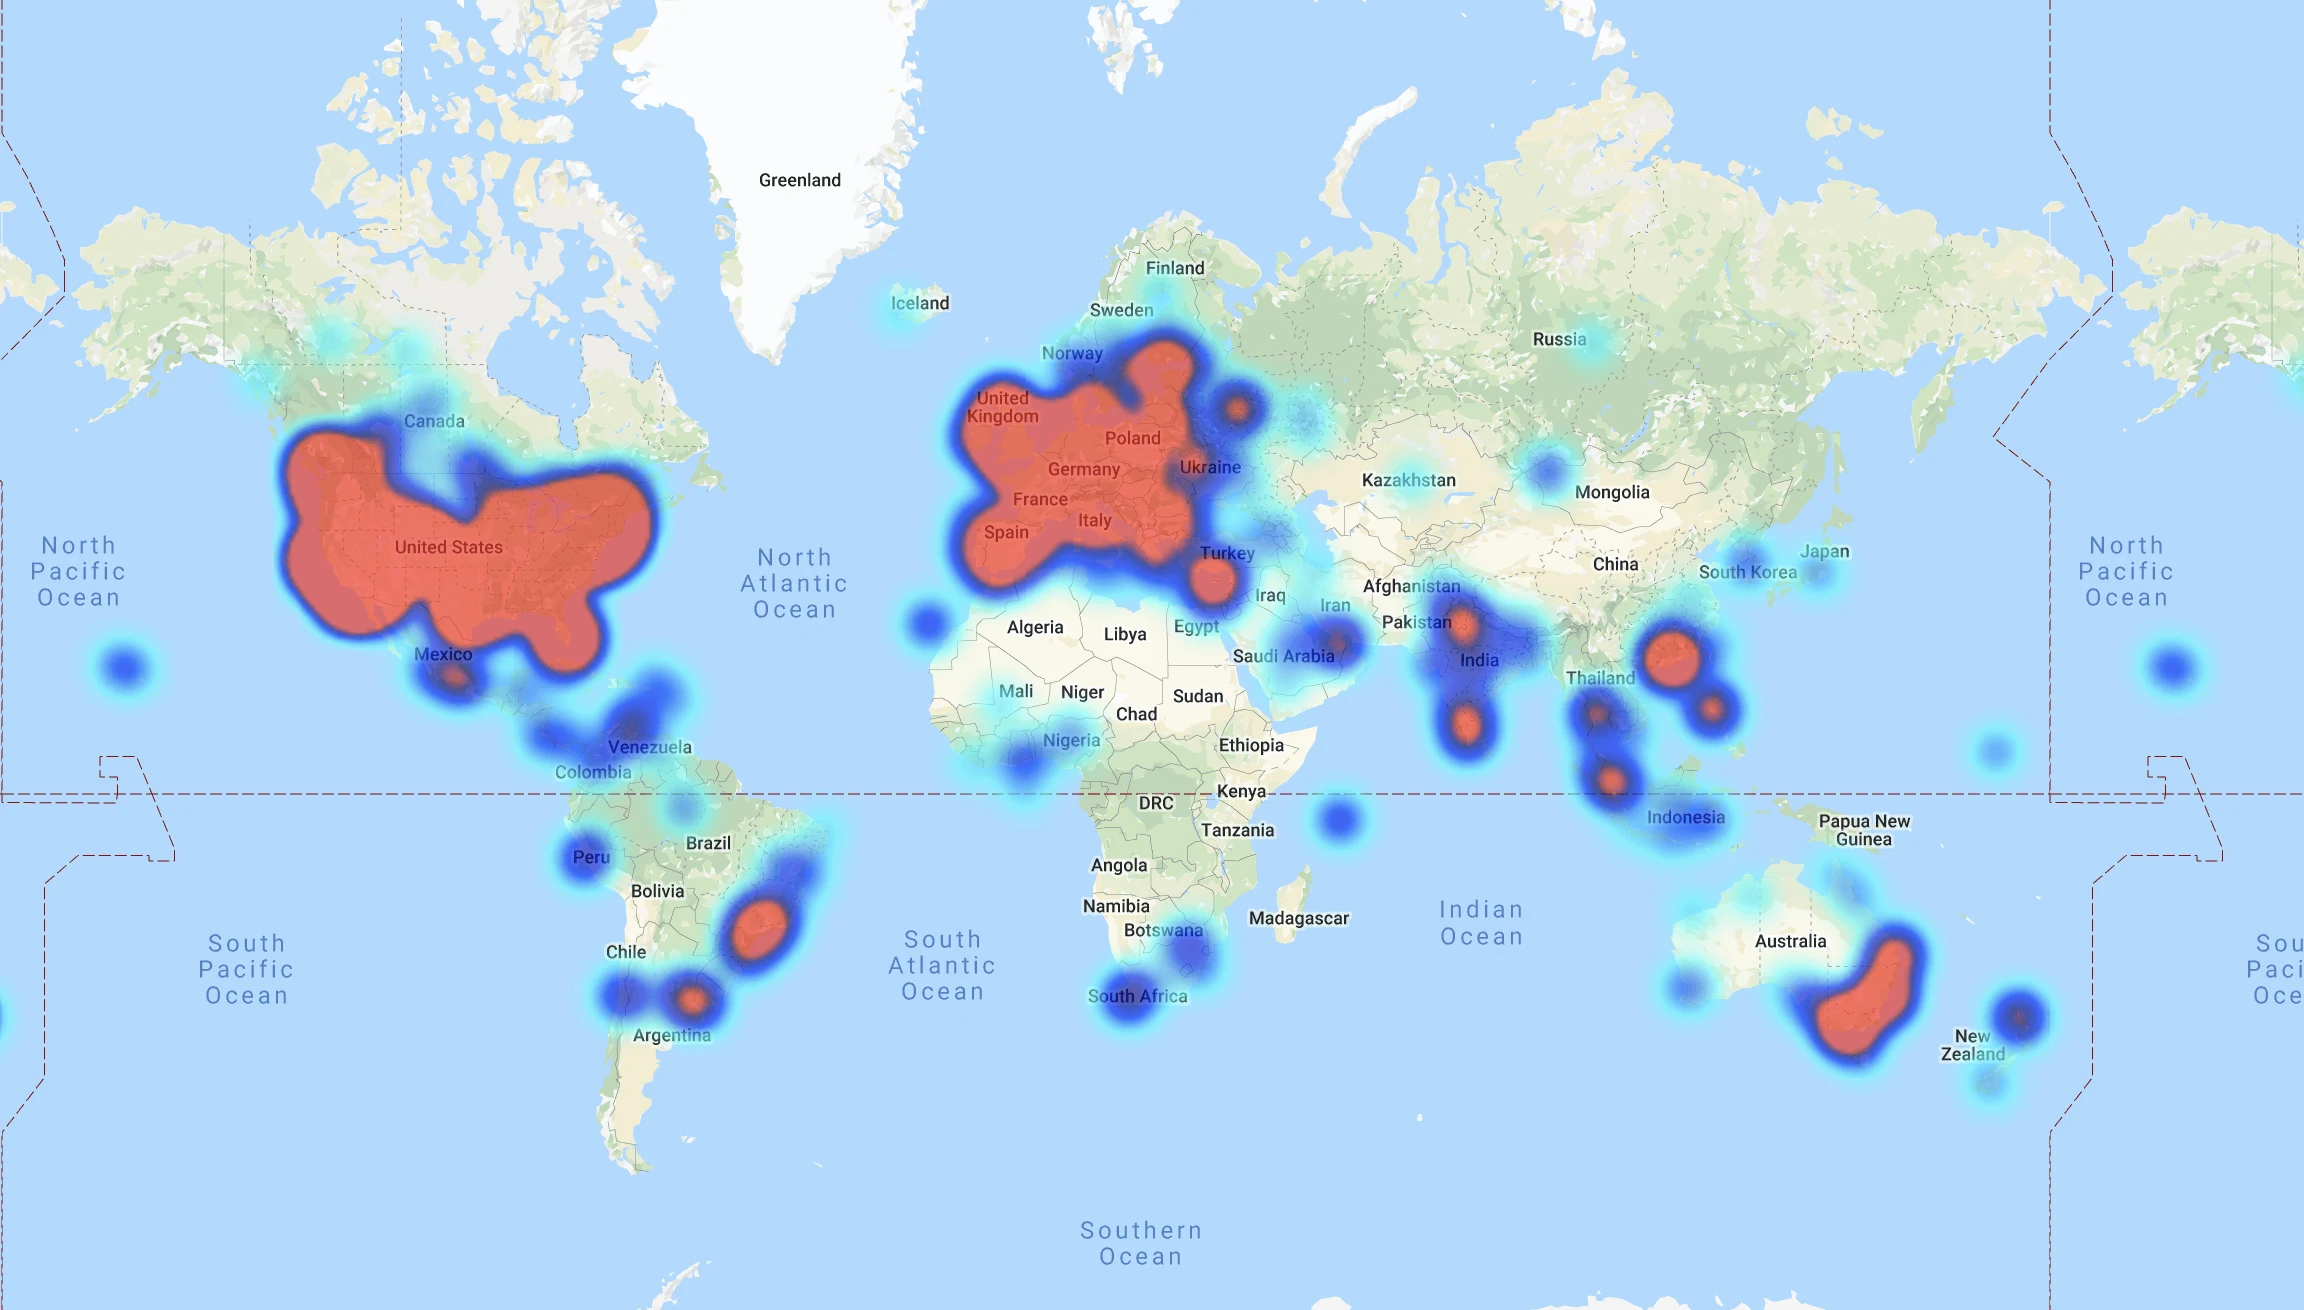 Image: This Global Heatmap Shows Retail Cryptocurrency Adoption